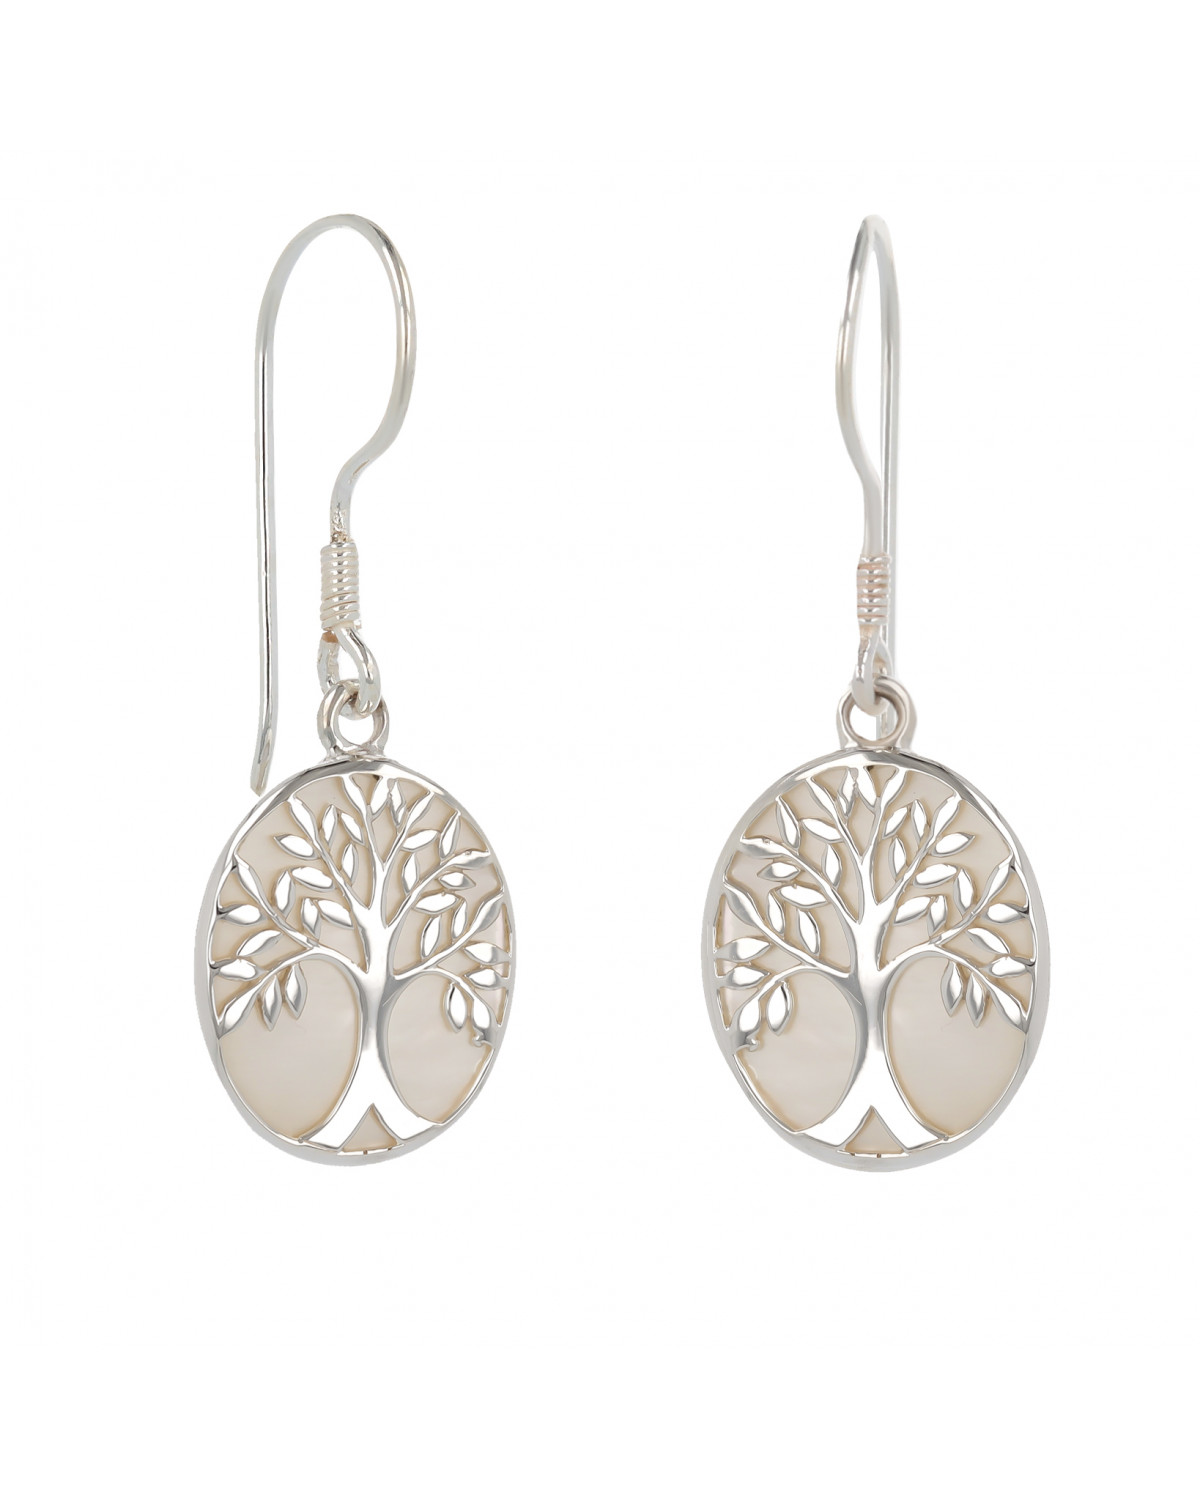 Jewelery Gift Symbol Tree of Life-Earrings-Mother of pearl- Sterling Silver-Oval-Women